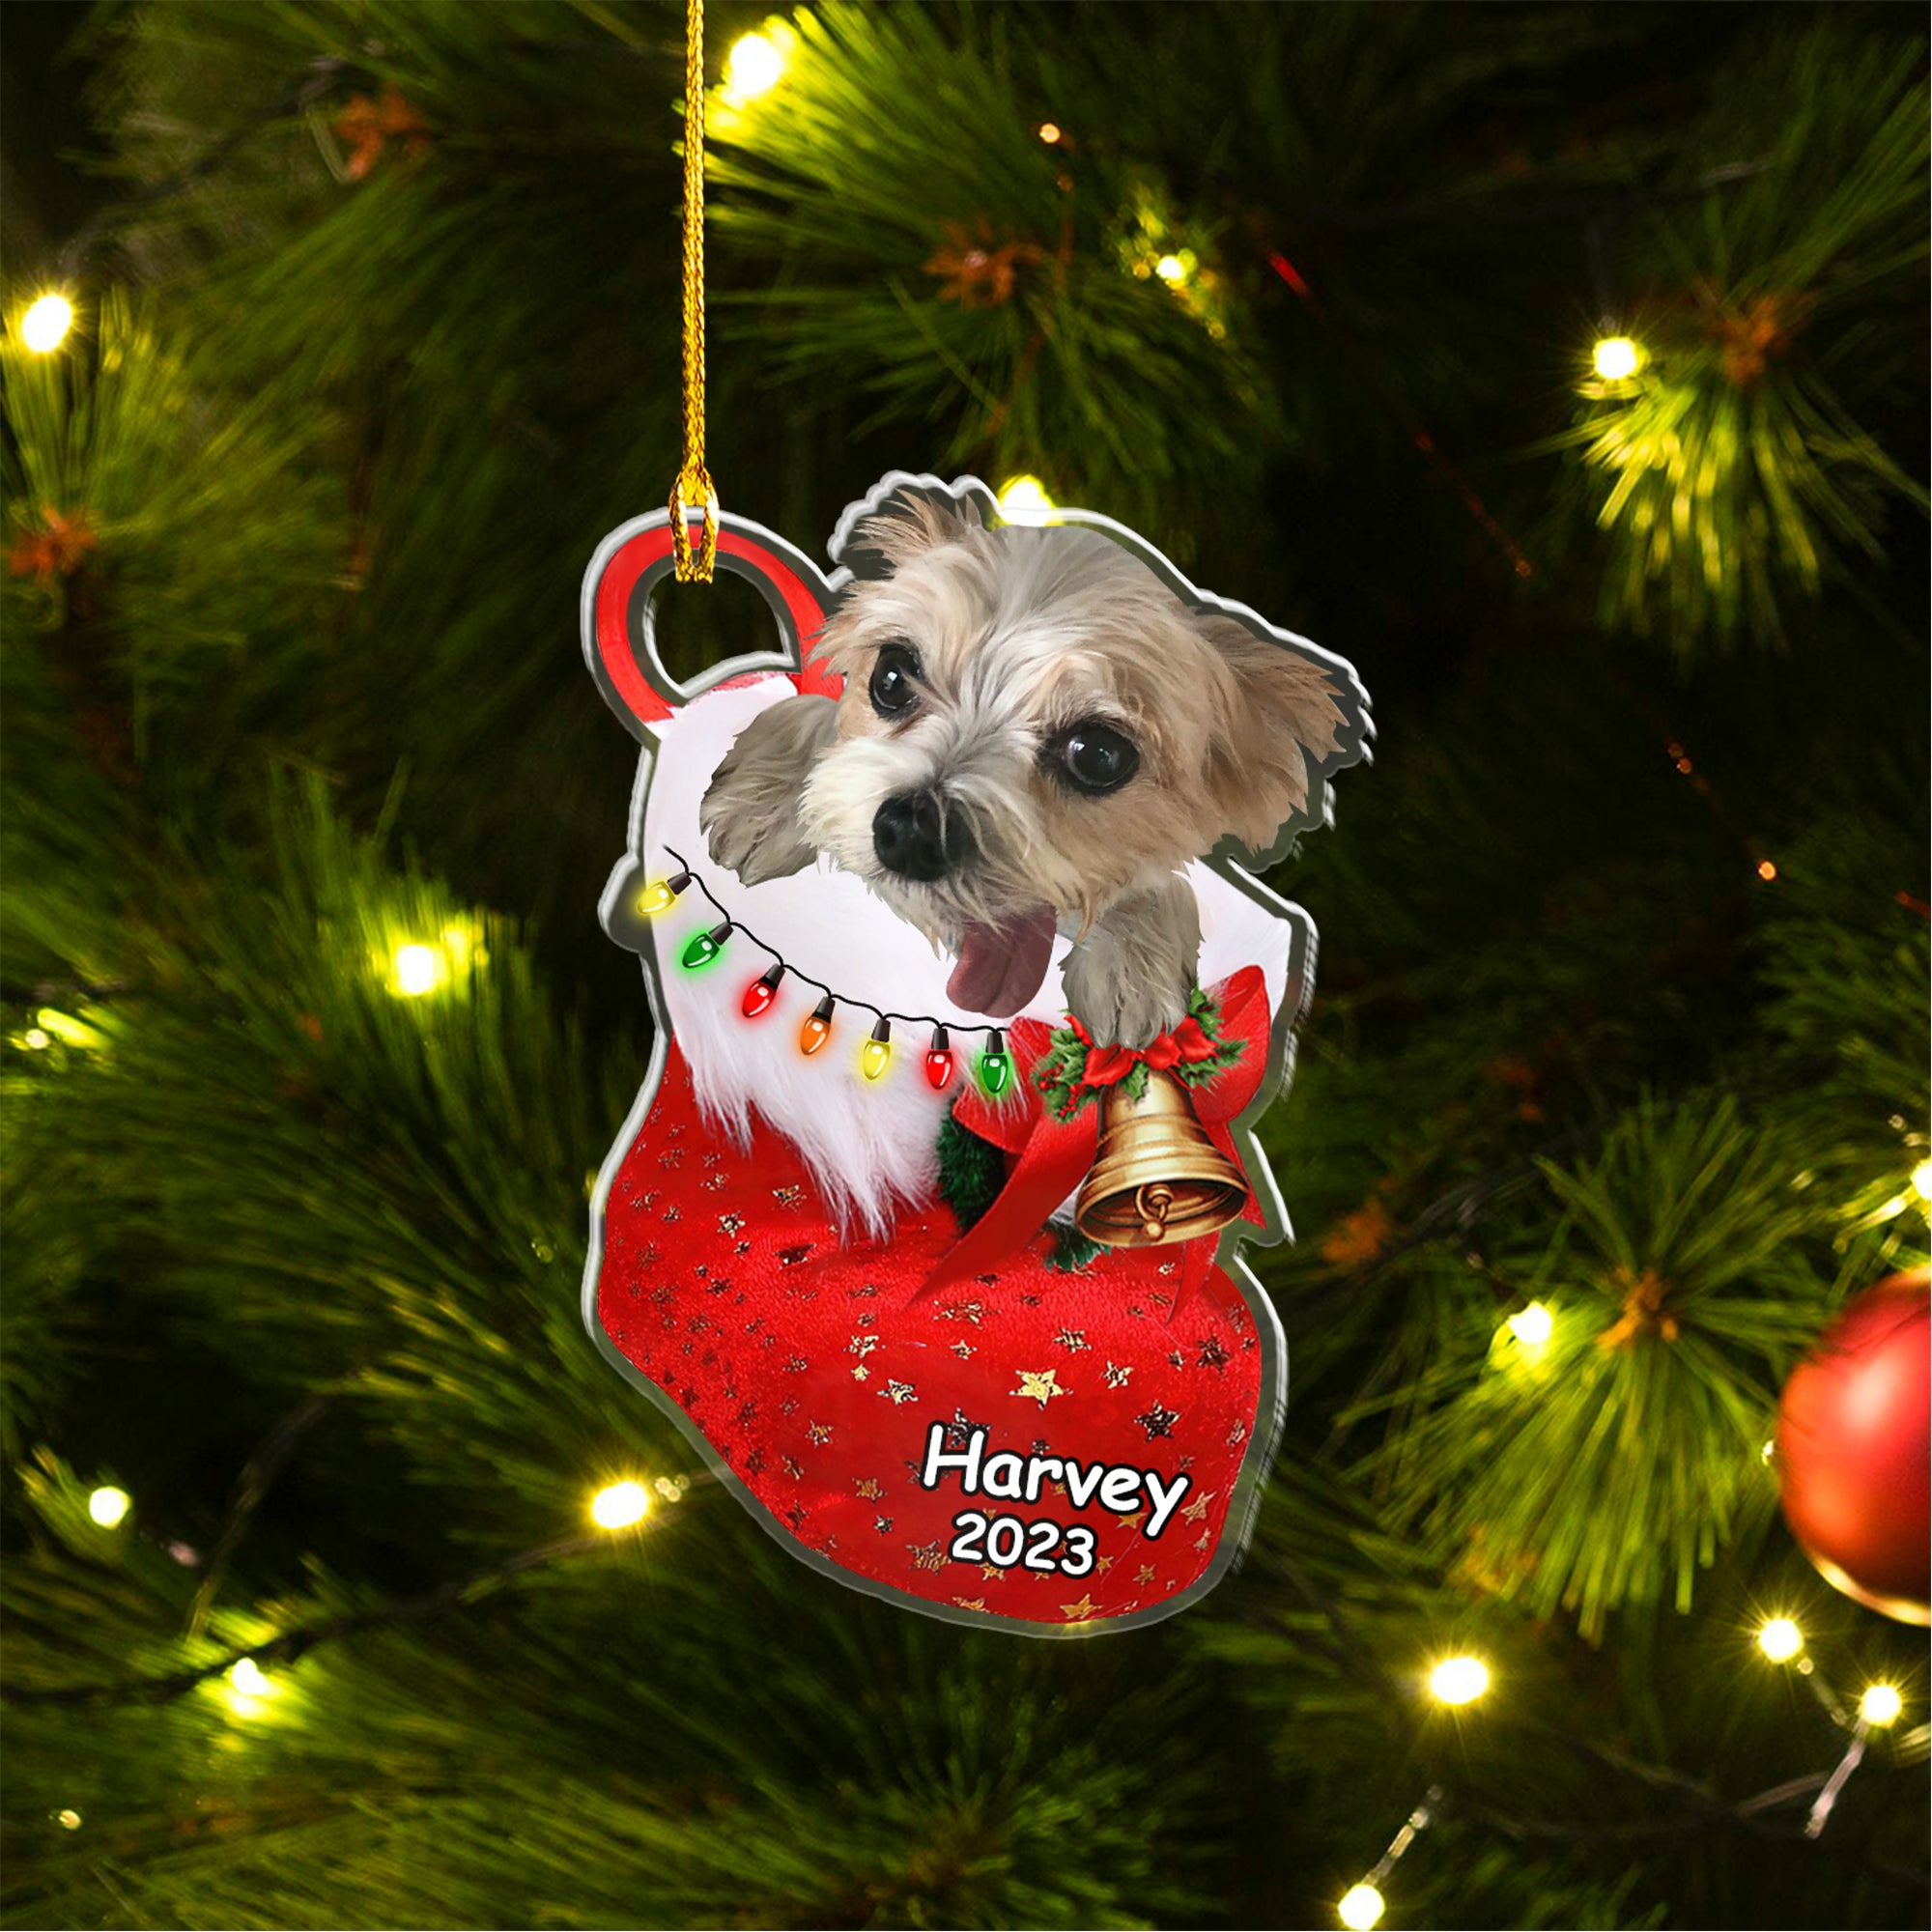 Custom Dog Photo Acrylic Christmas Ornament, Personalized Biewer Terrier in Christmas Sock Ornament for Dog Lover, New Year